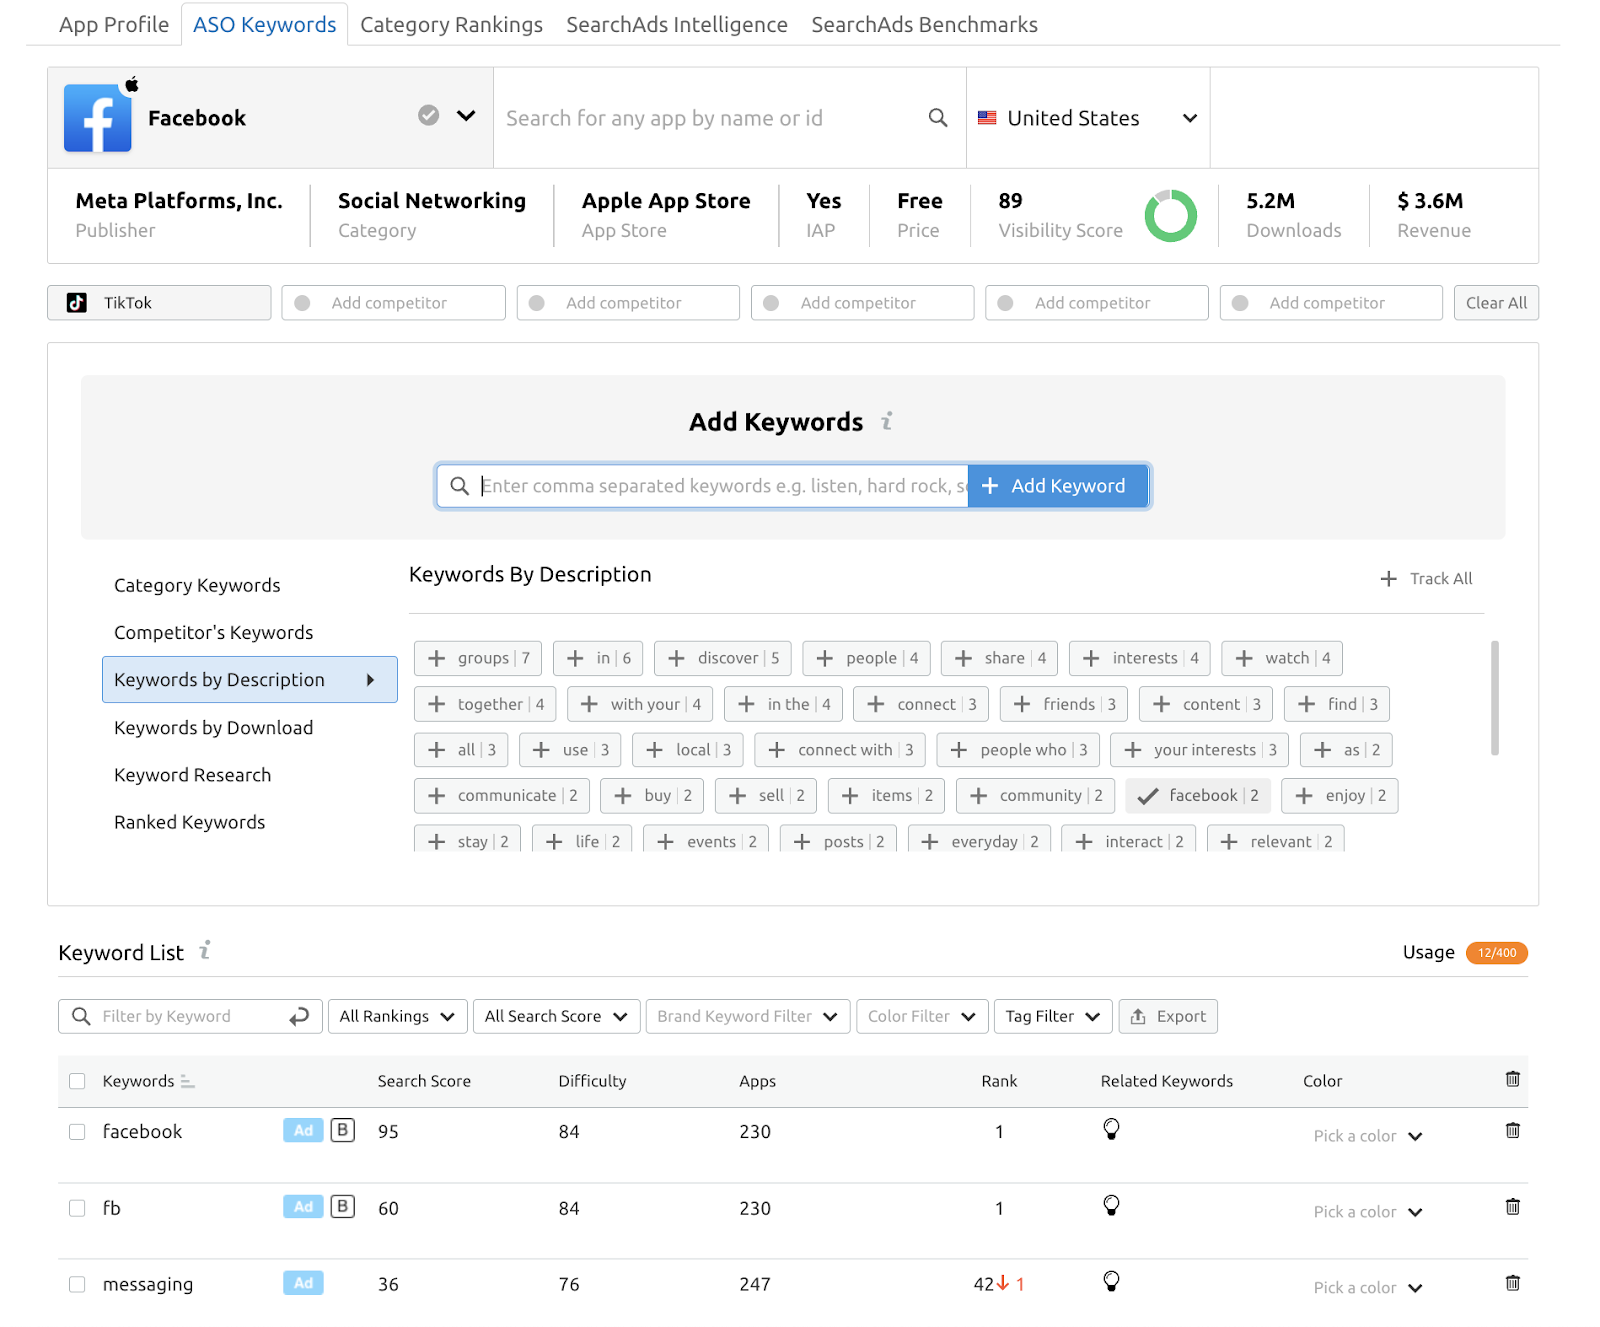 Keyword research in the Mobile App Insights app